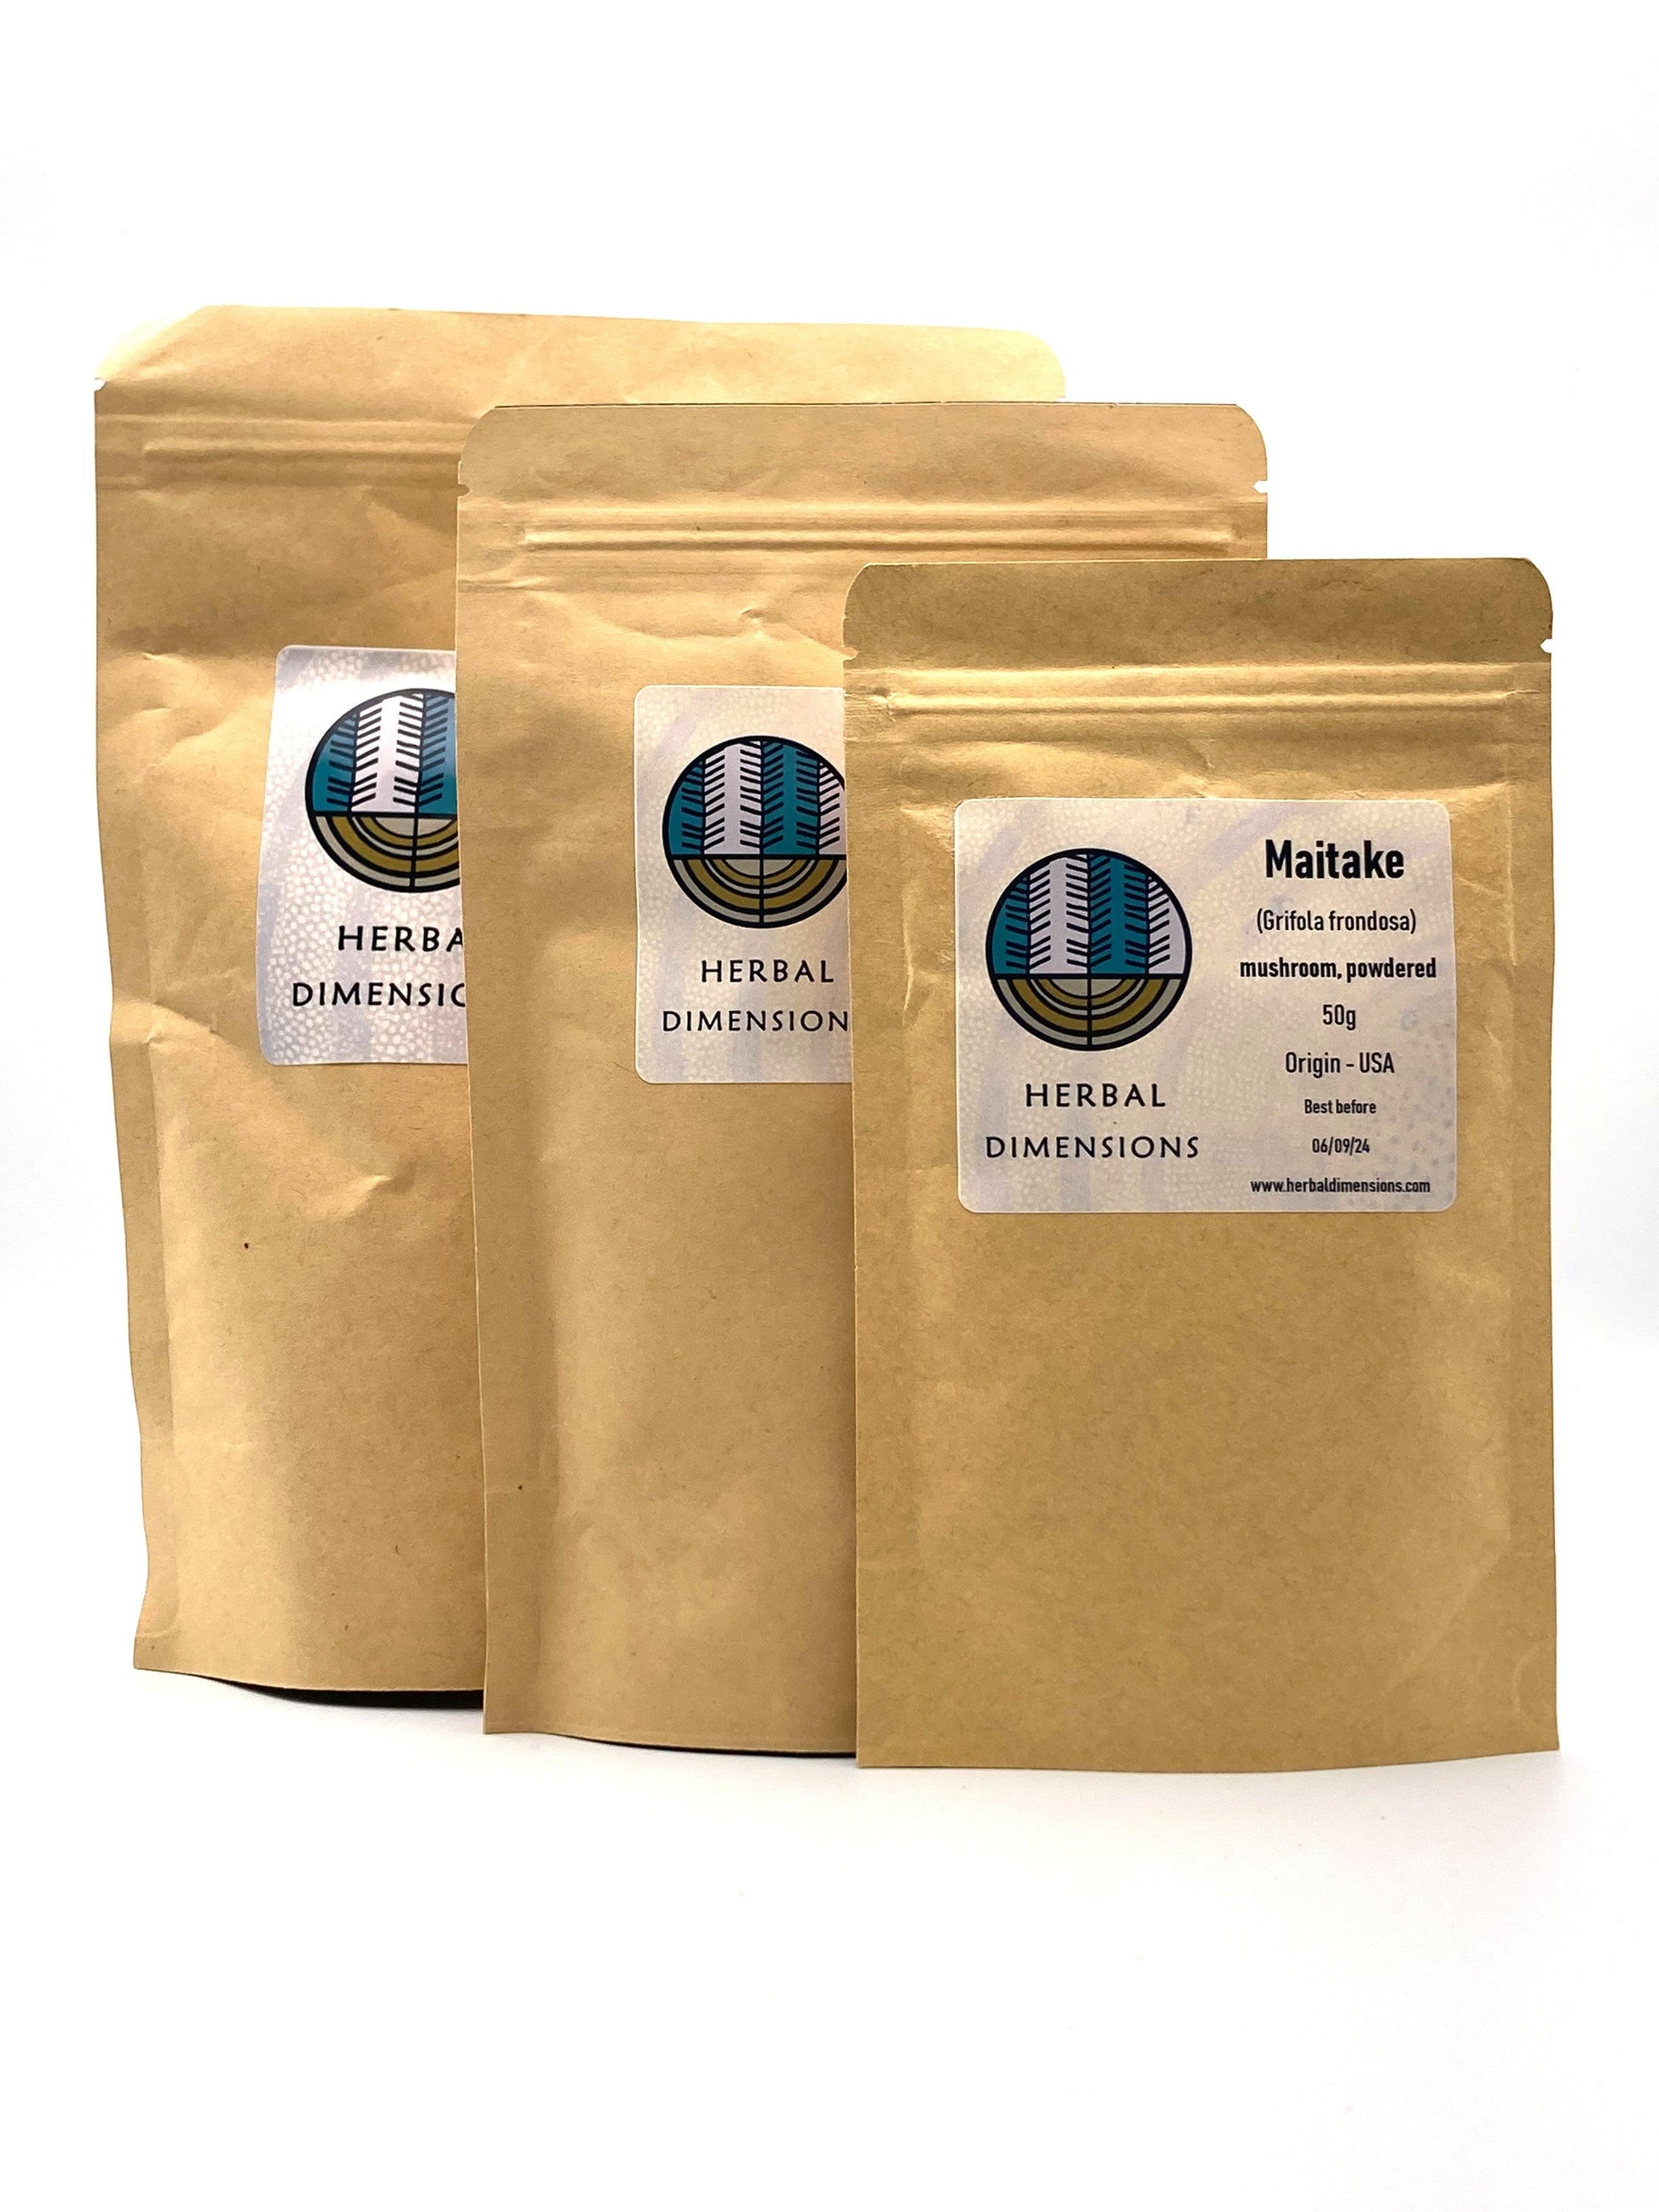 Maitake mushroom powder in recyclable pouches